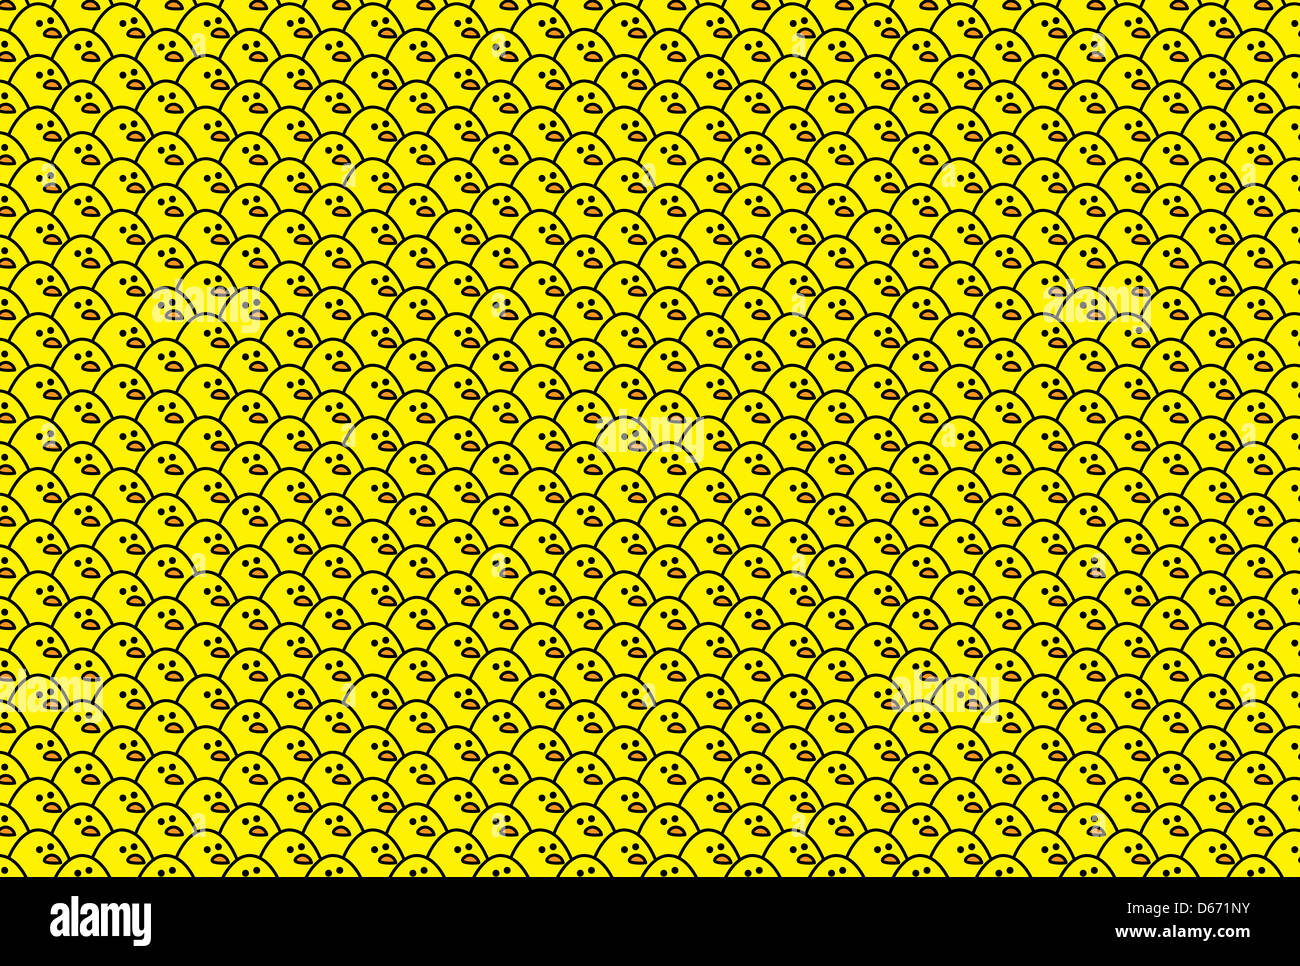 Crowd of identical Yellow Chicks all Looking Right creating a Wallpaper Background Stock Photo